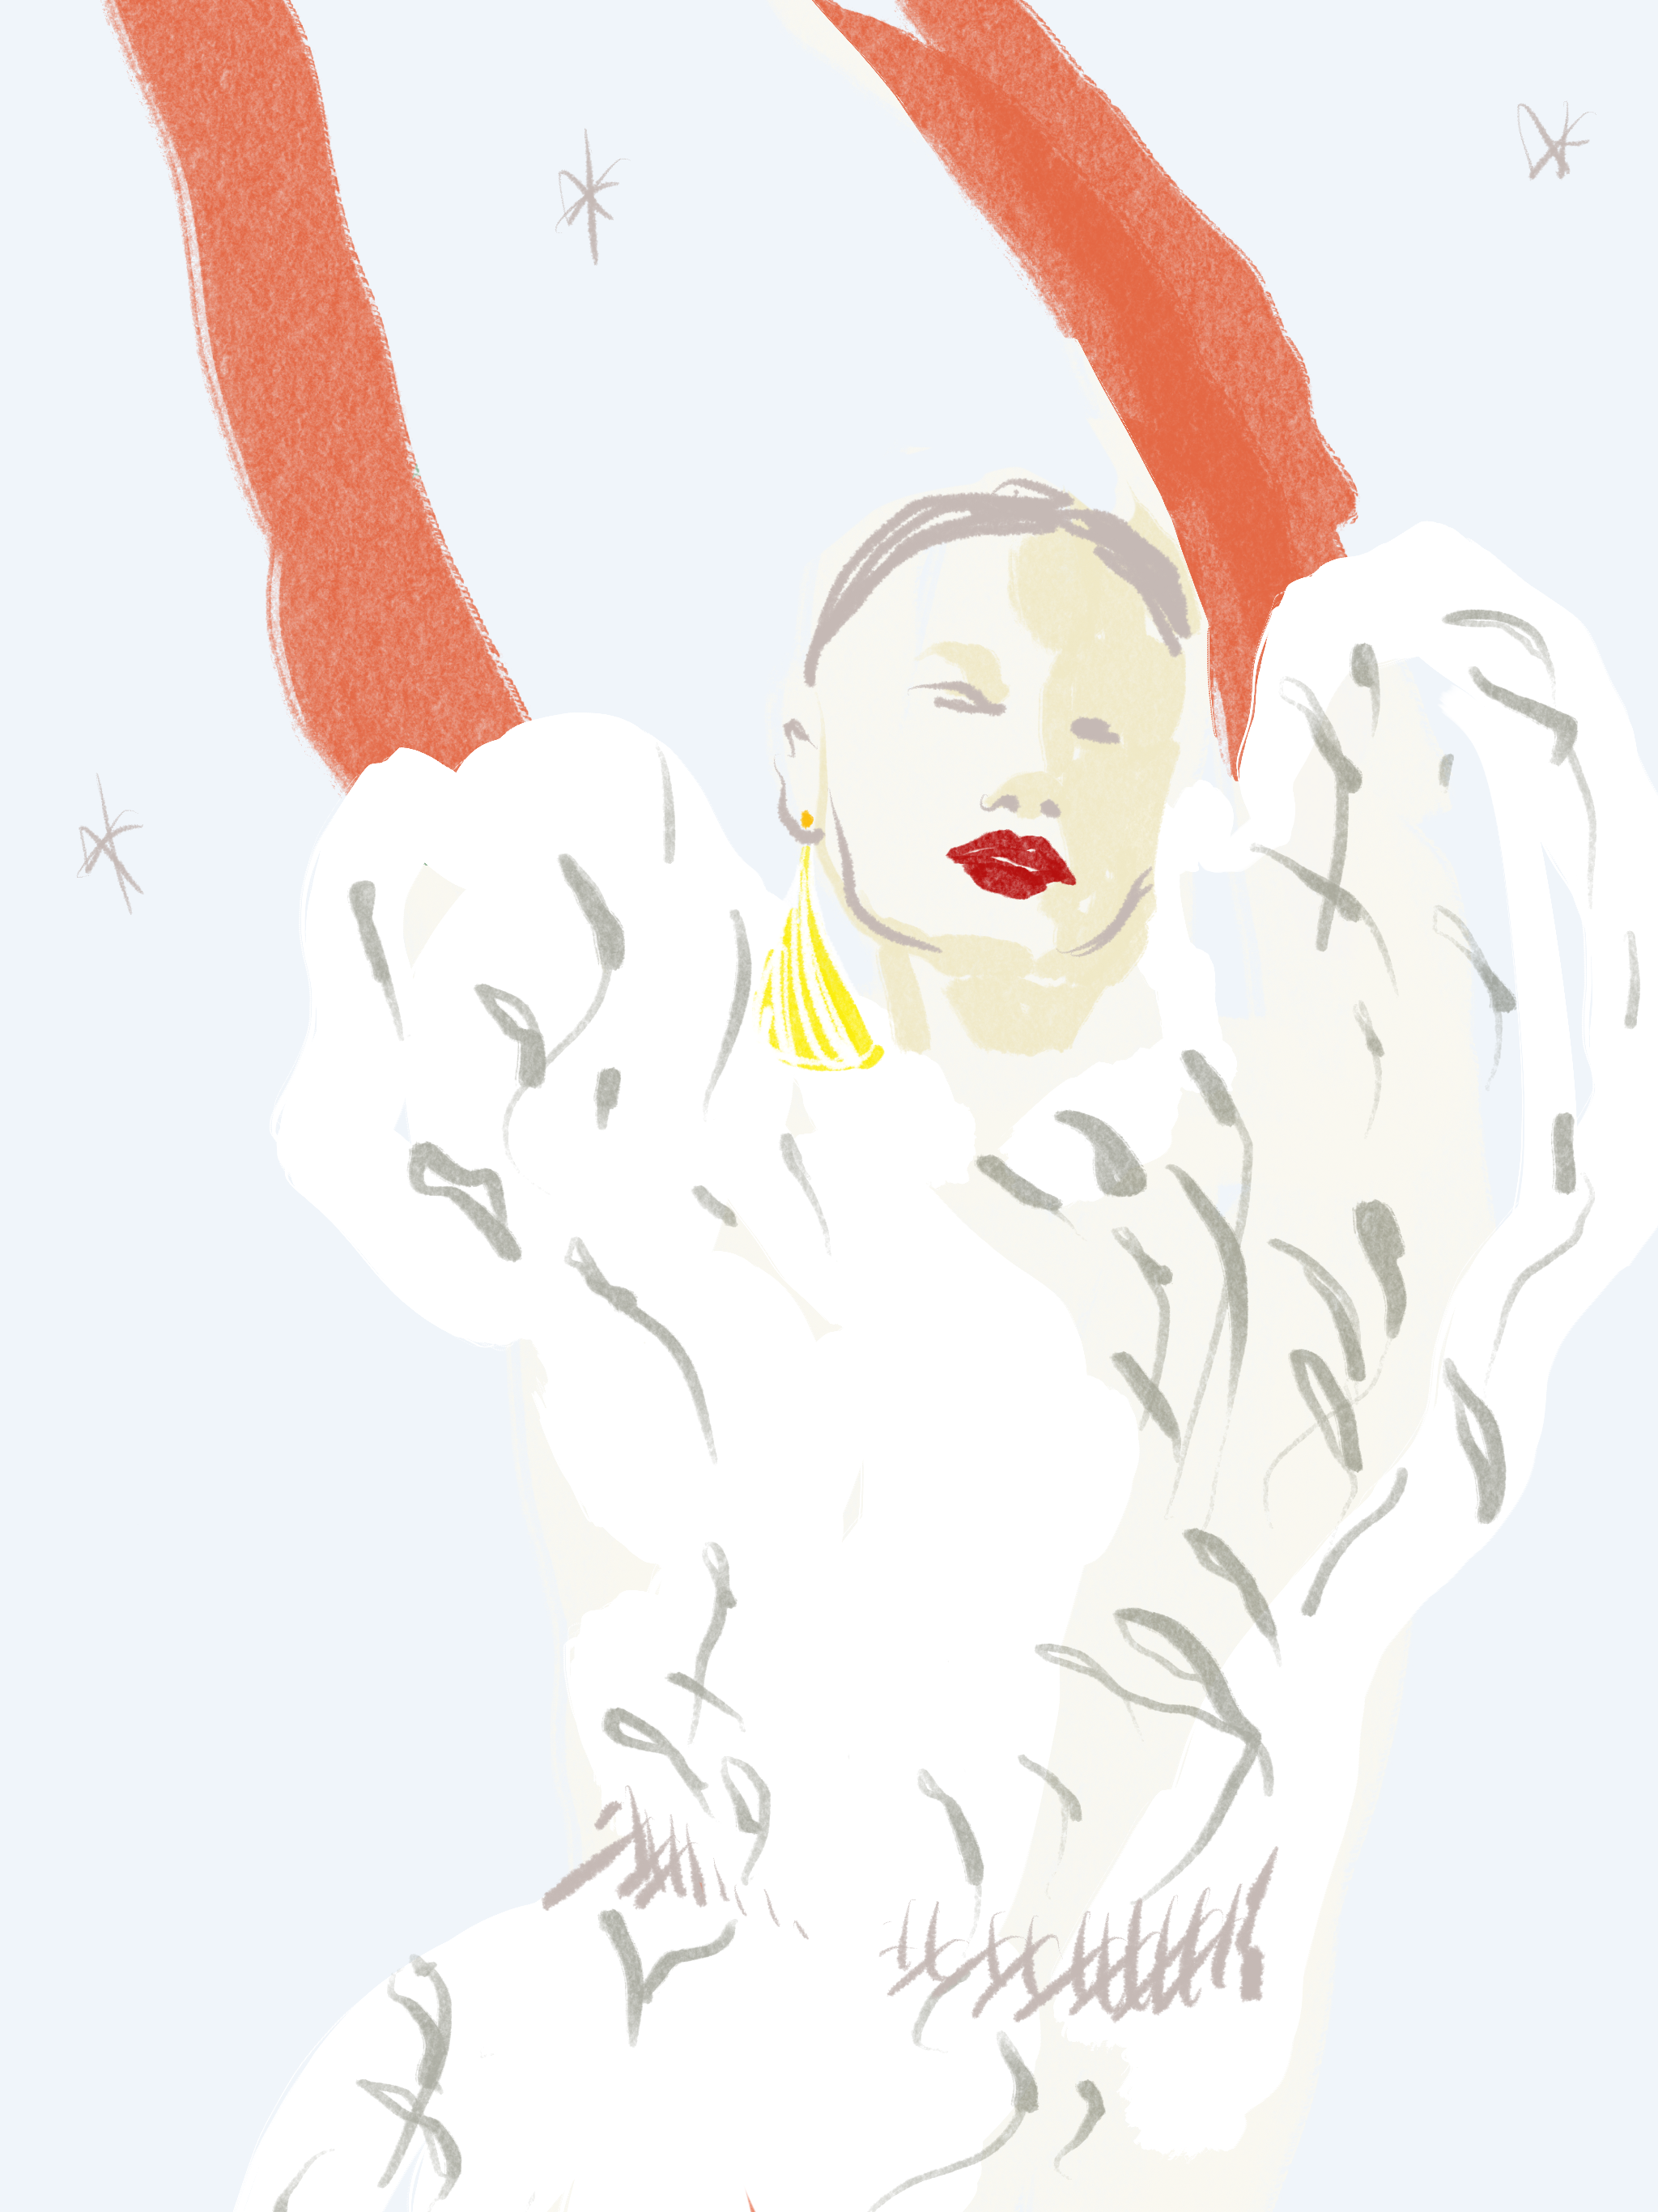 Girl with hands up, Glam Illustrations by Silvana Mariani